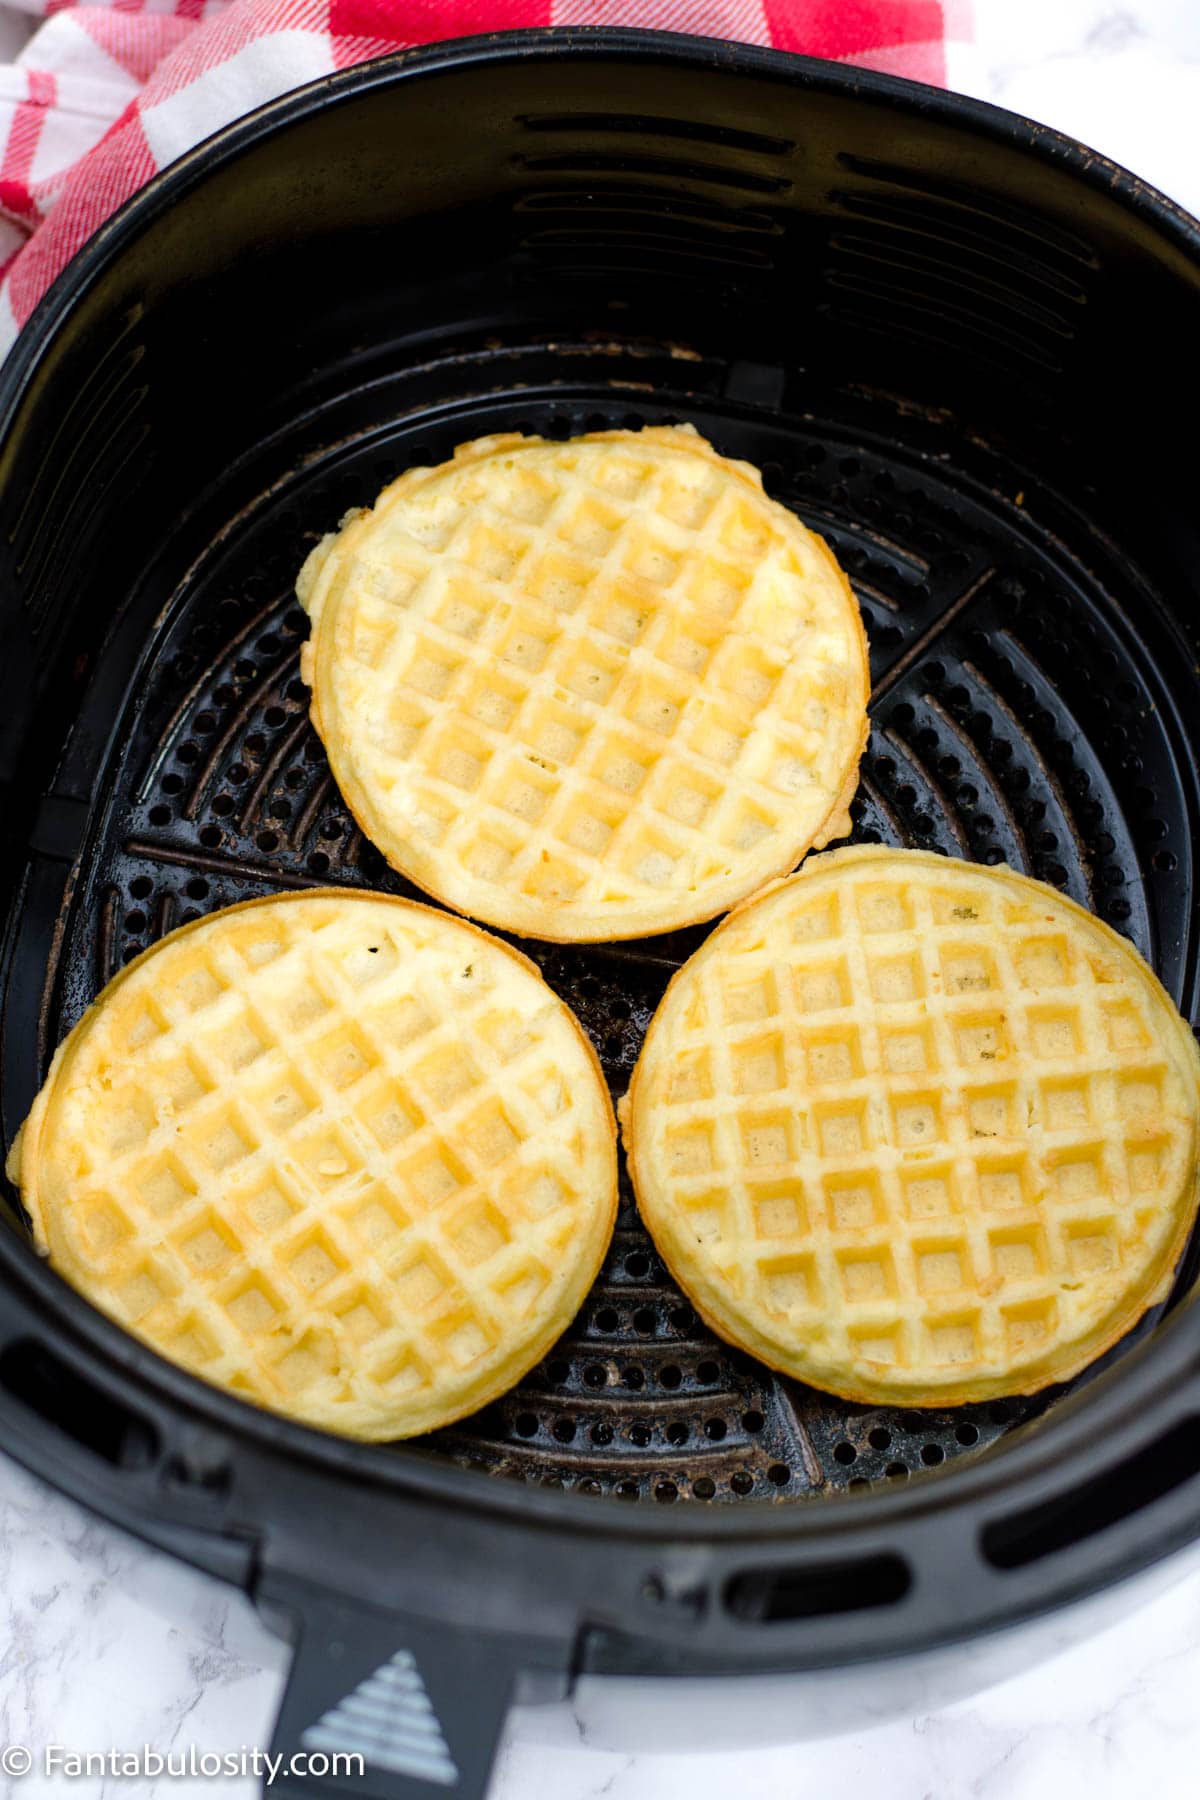 Cooked frozen waffles in the air fryer basket.